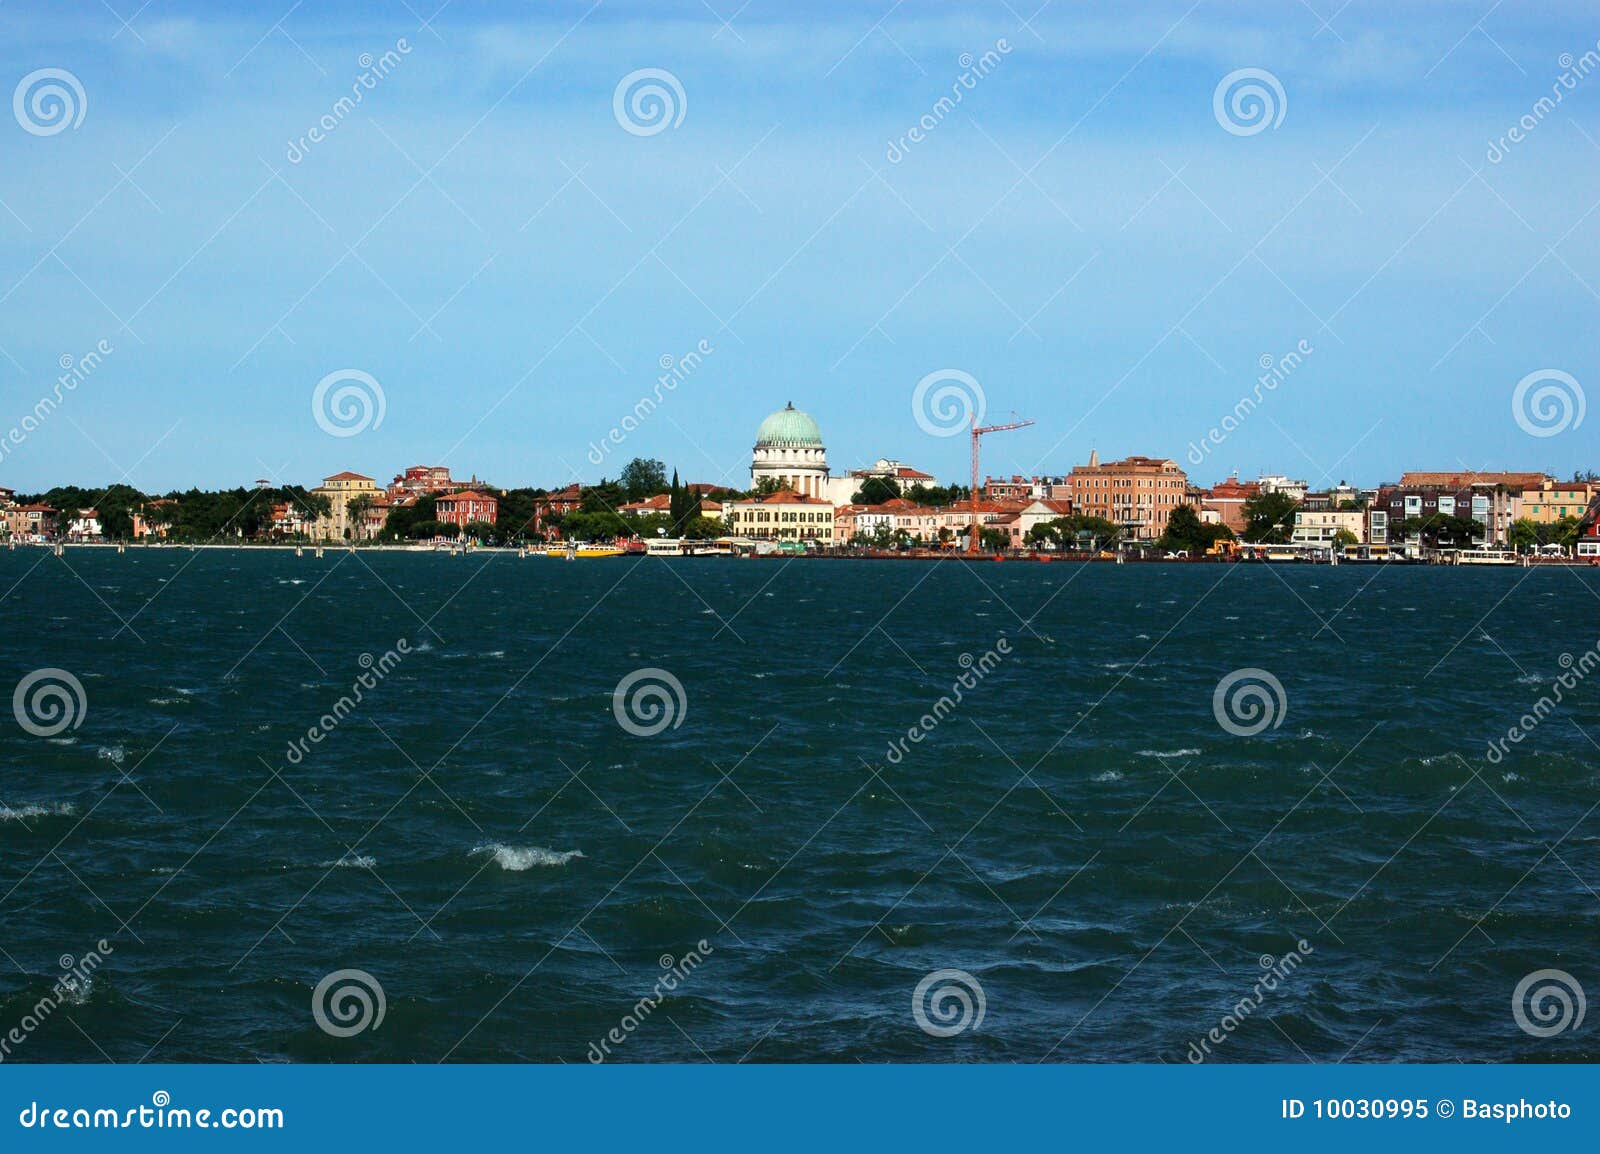 view of lido from san servolo, venice